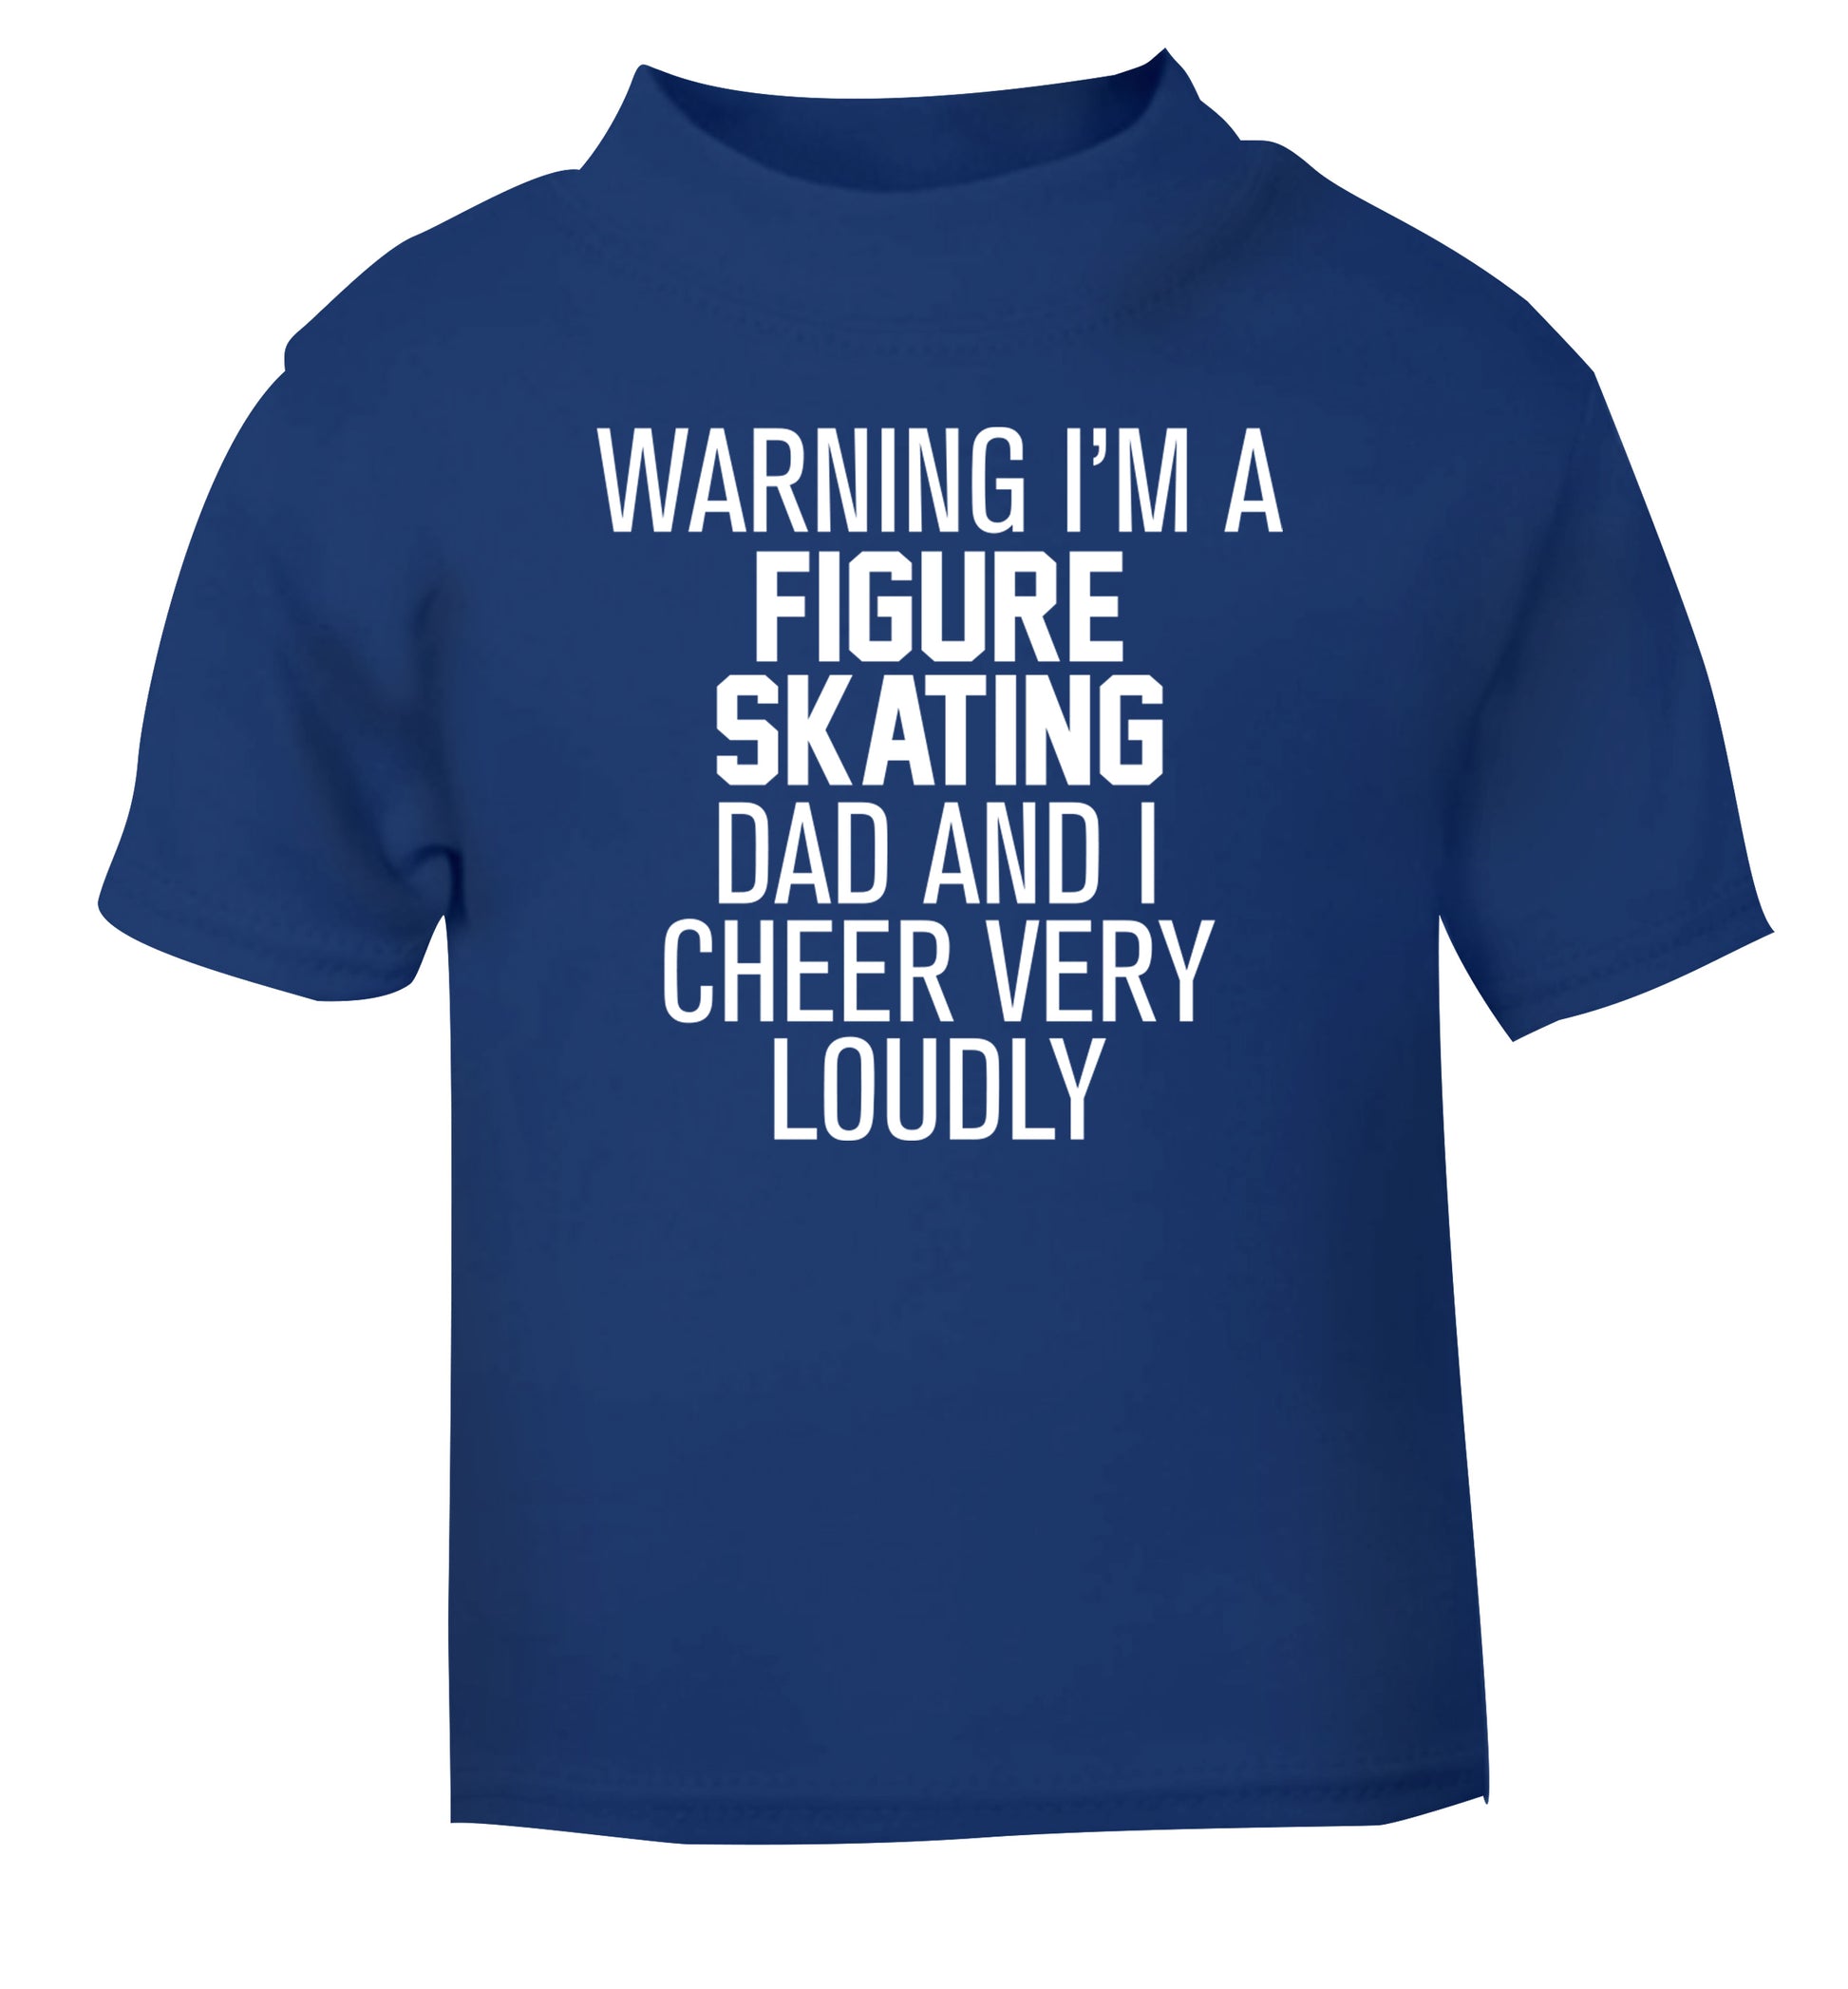 Warning I'm a figure skating dad and I cheer very loudly blue Baby Toddler Tshirt 2 Years